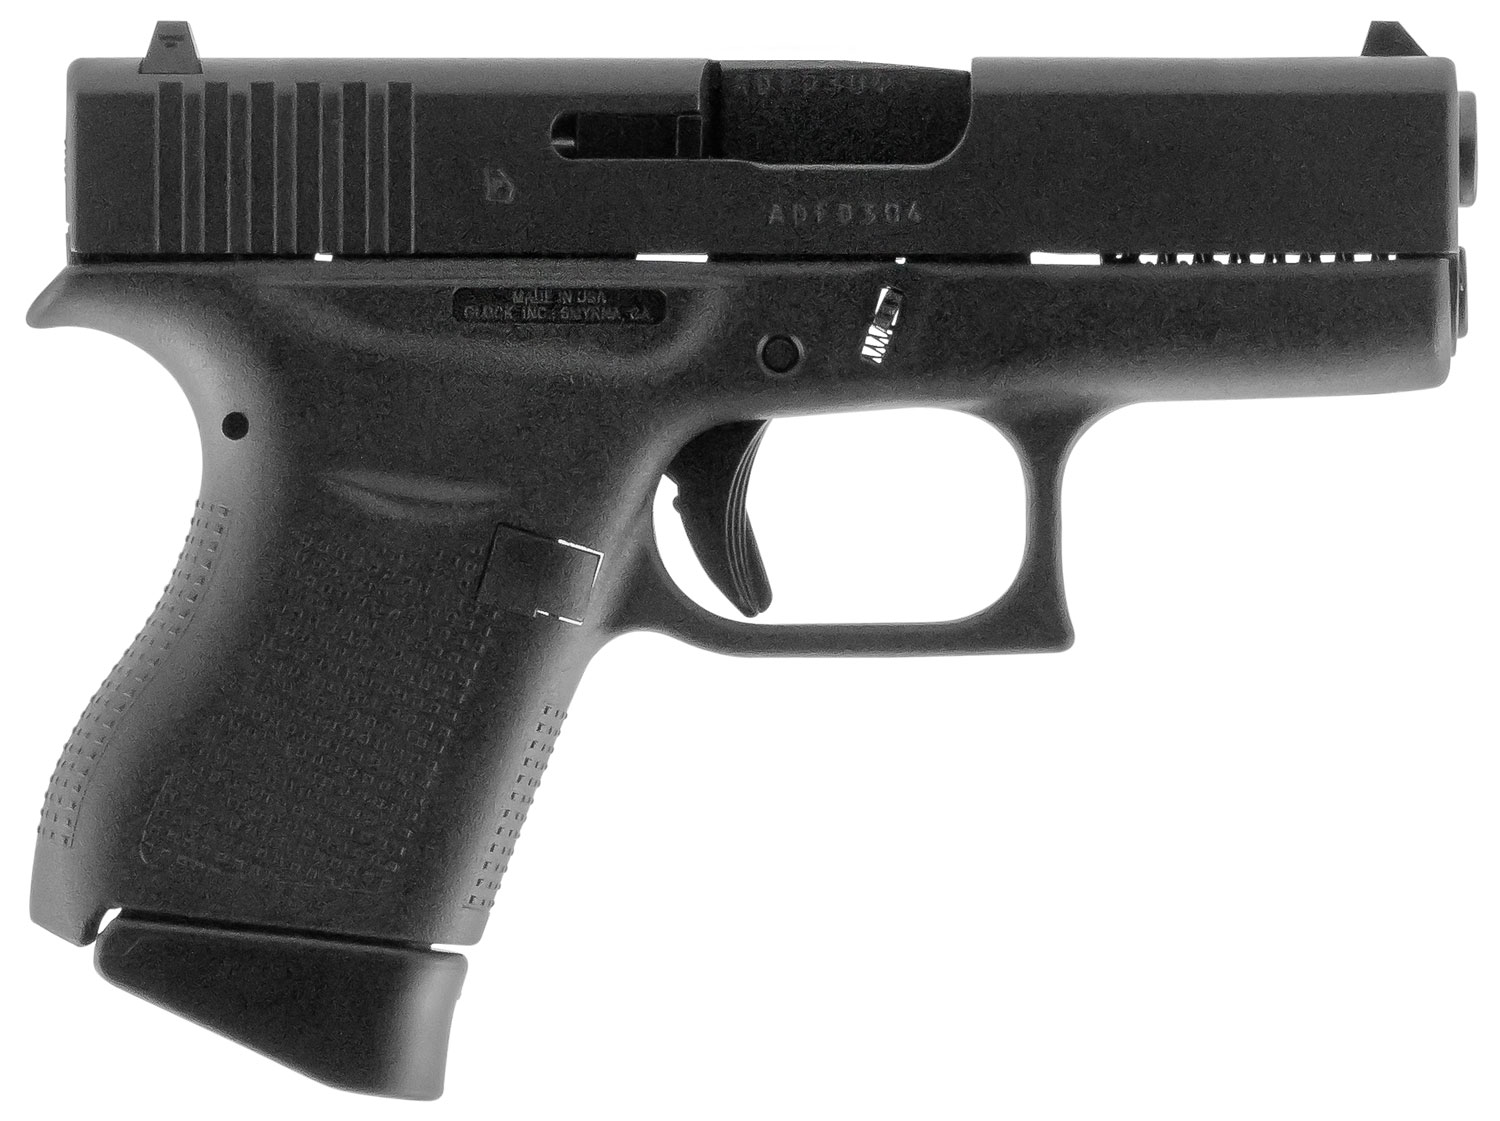 Glock UI4350201 G43  Sub-Compact 9mm Luger 6+1 3.41